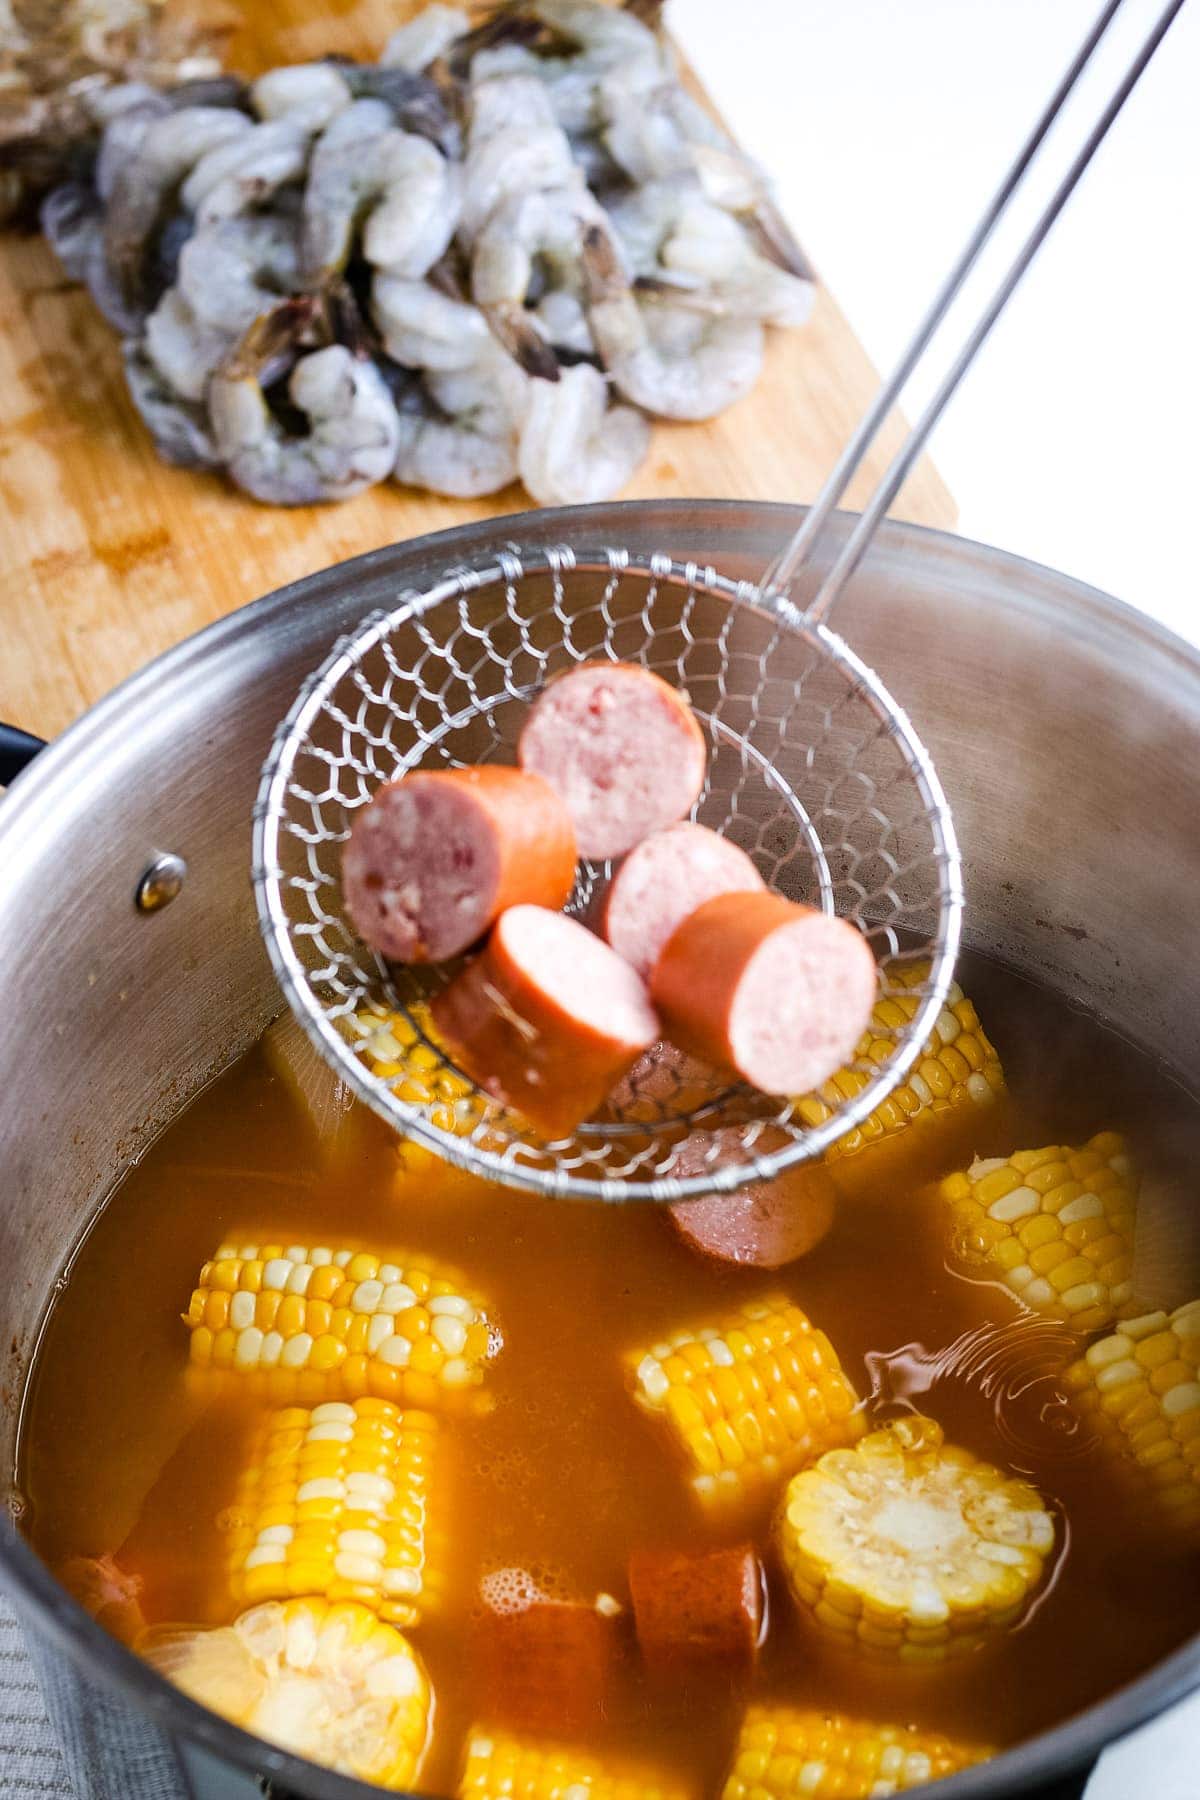 Ladle holding smoked sausage before placing it into shrimp boil pot